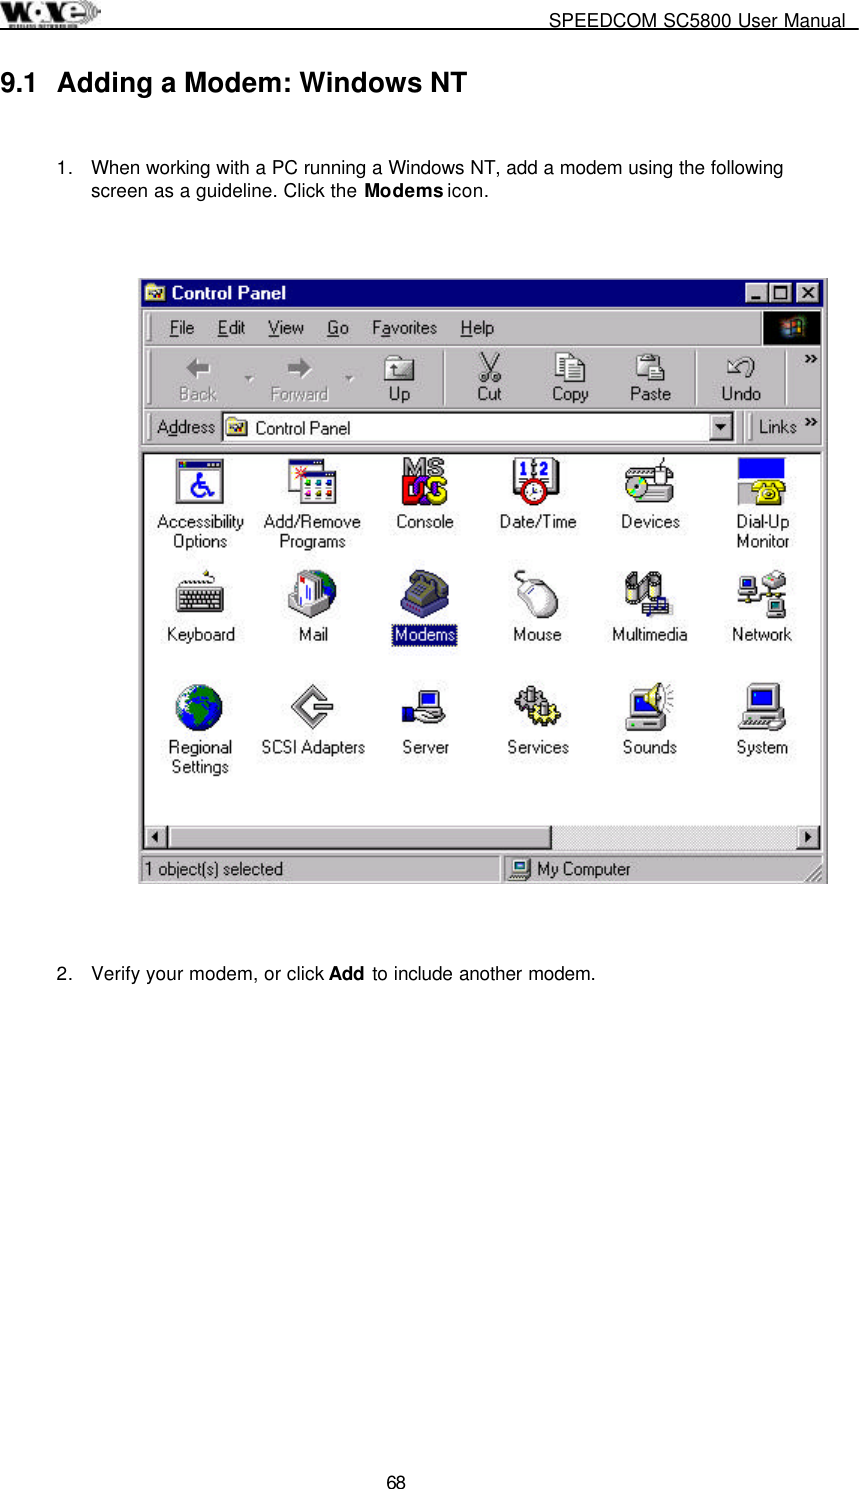     SPEEDCOM SC5800 User Manual  68 9.1  Adding a Modem: Windows NT  1.  When working with a PC running a Windows NT, add a modem using the following screen as a guideline. Click the Modems icon.      2.  Verify your modem, or click Add to include another modem.   